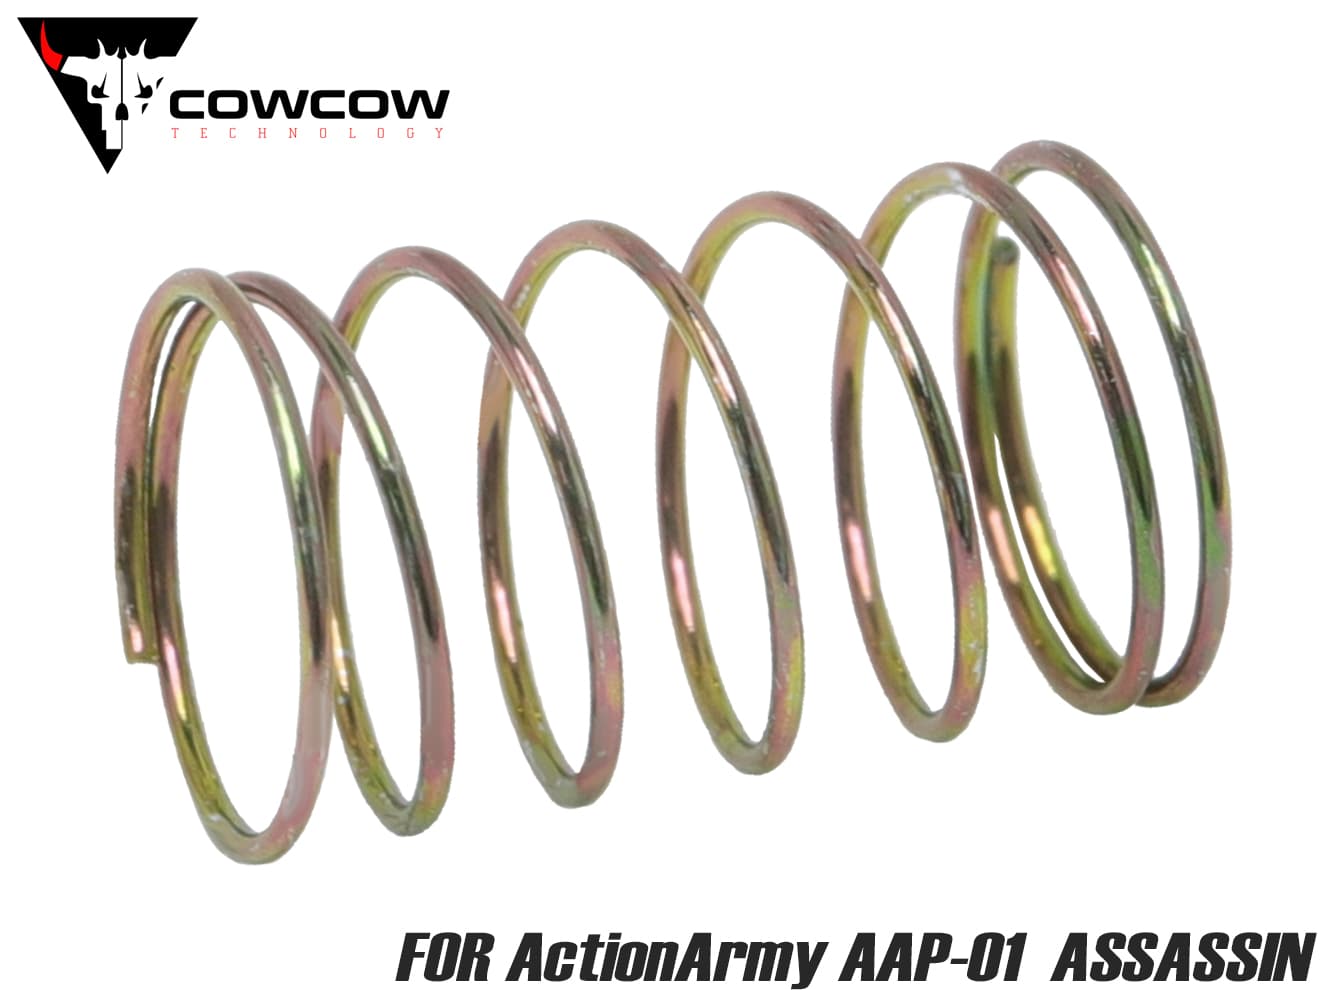 COWCOW TECHNOLOGY 強化ハンマースプリングセット for ActionArmy AAP 